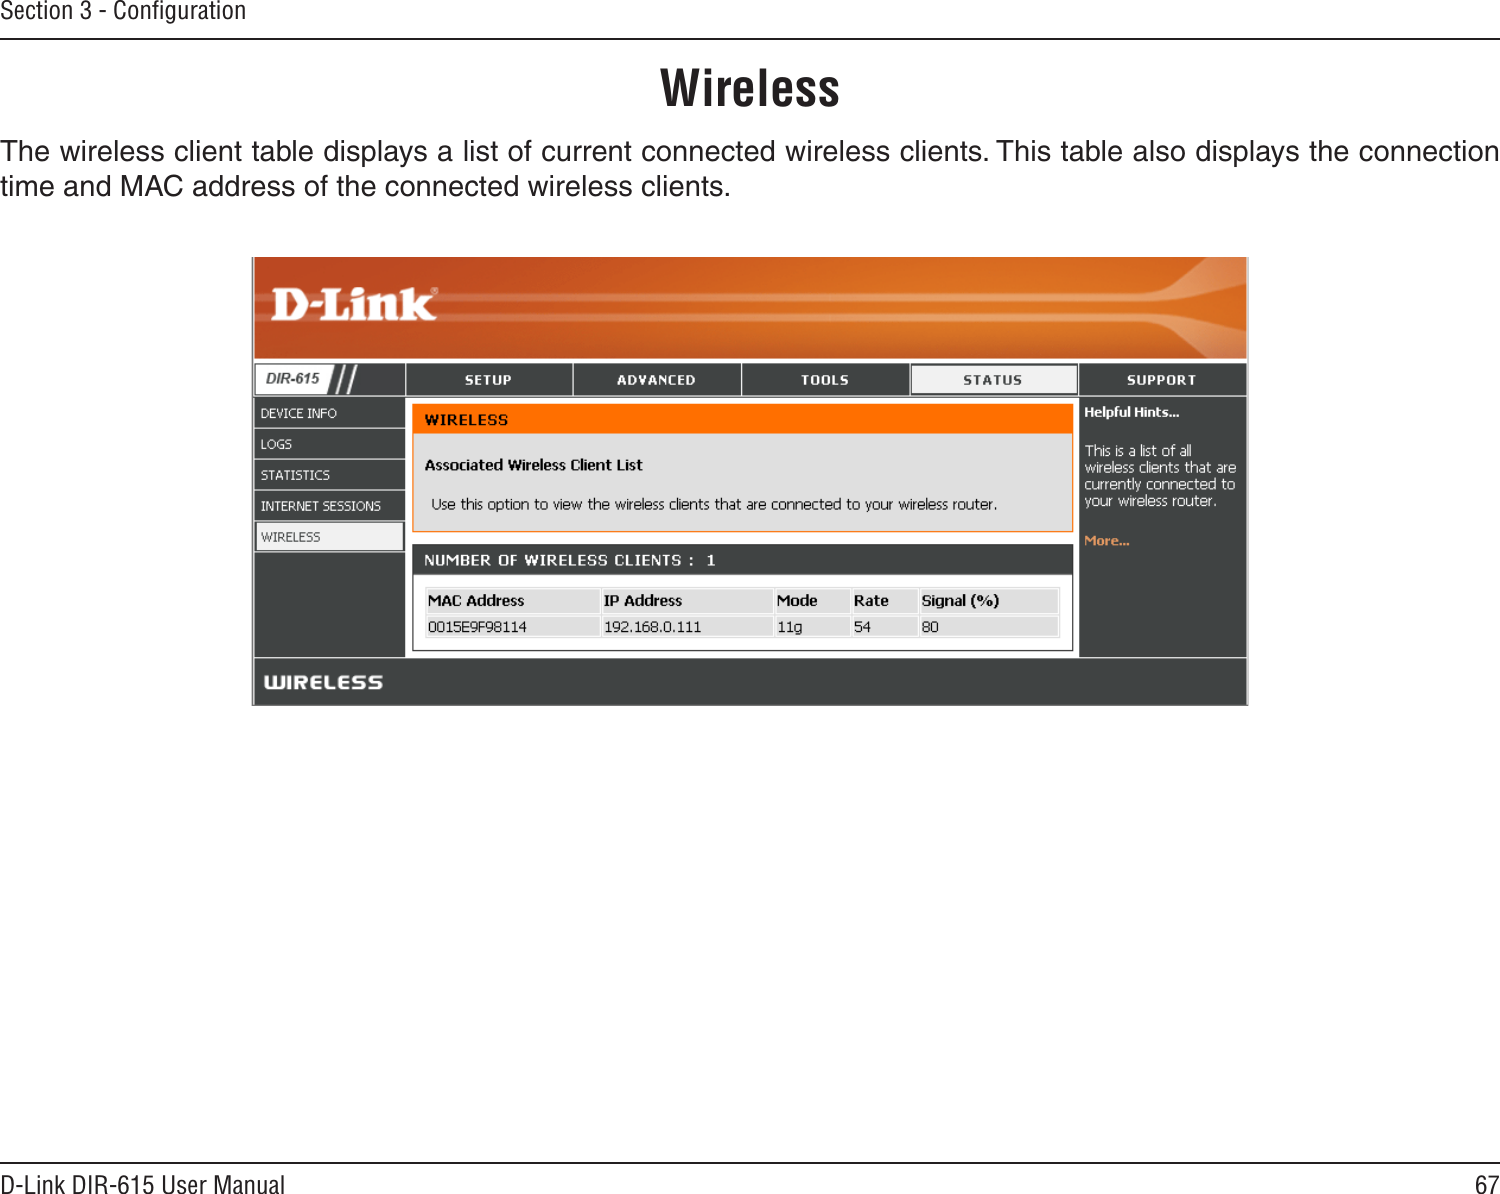 67D-Link DIR-615 User ManualSection 3 - ConﬁgurationThe wireless client table displays a list of current connected wireless clients. This table also displays the connection time and MAC address of the connected wireless clients.Wireless